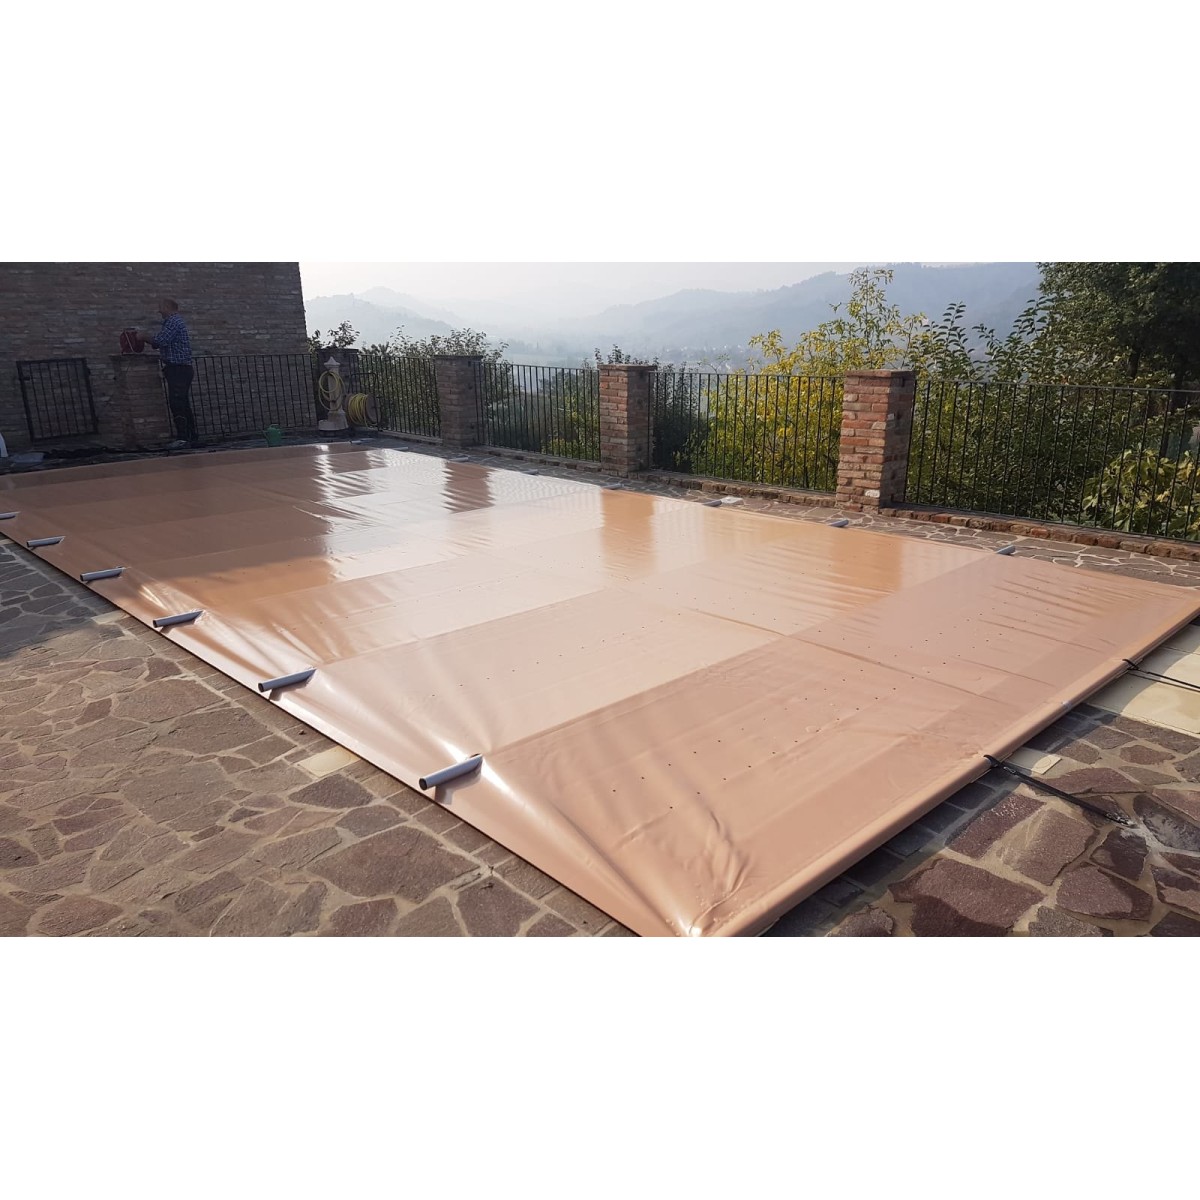 Buy Pool cover with rods Easy Top - size 5x10